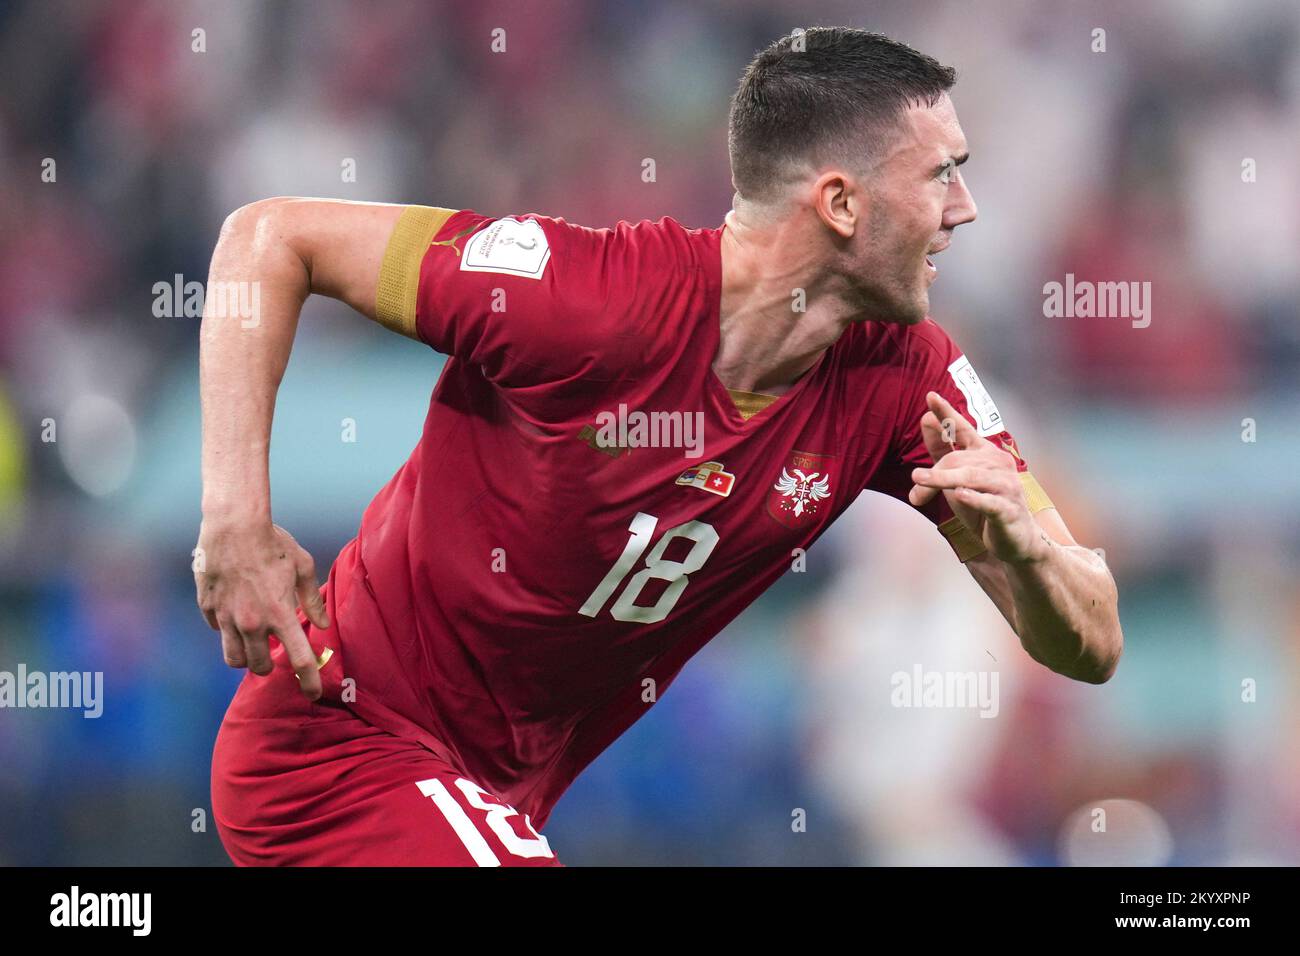 Doha, Qatar. 2nd Dec, 2022. Dusan Vlahovic of Serbia celebrates his goal during the Group G match between Serbia and Switzerland at the 2022 FIFA World Cup at Stadium 974 in Doha, Qatar, Dec. 2, 2022. Credit: Meng Dingbo/Xinhua/Alamy Live News Stock Photo